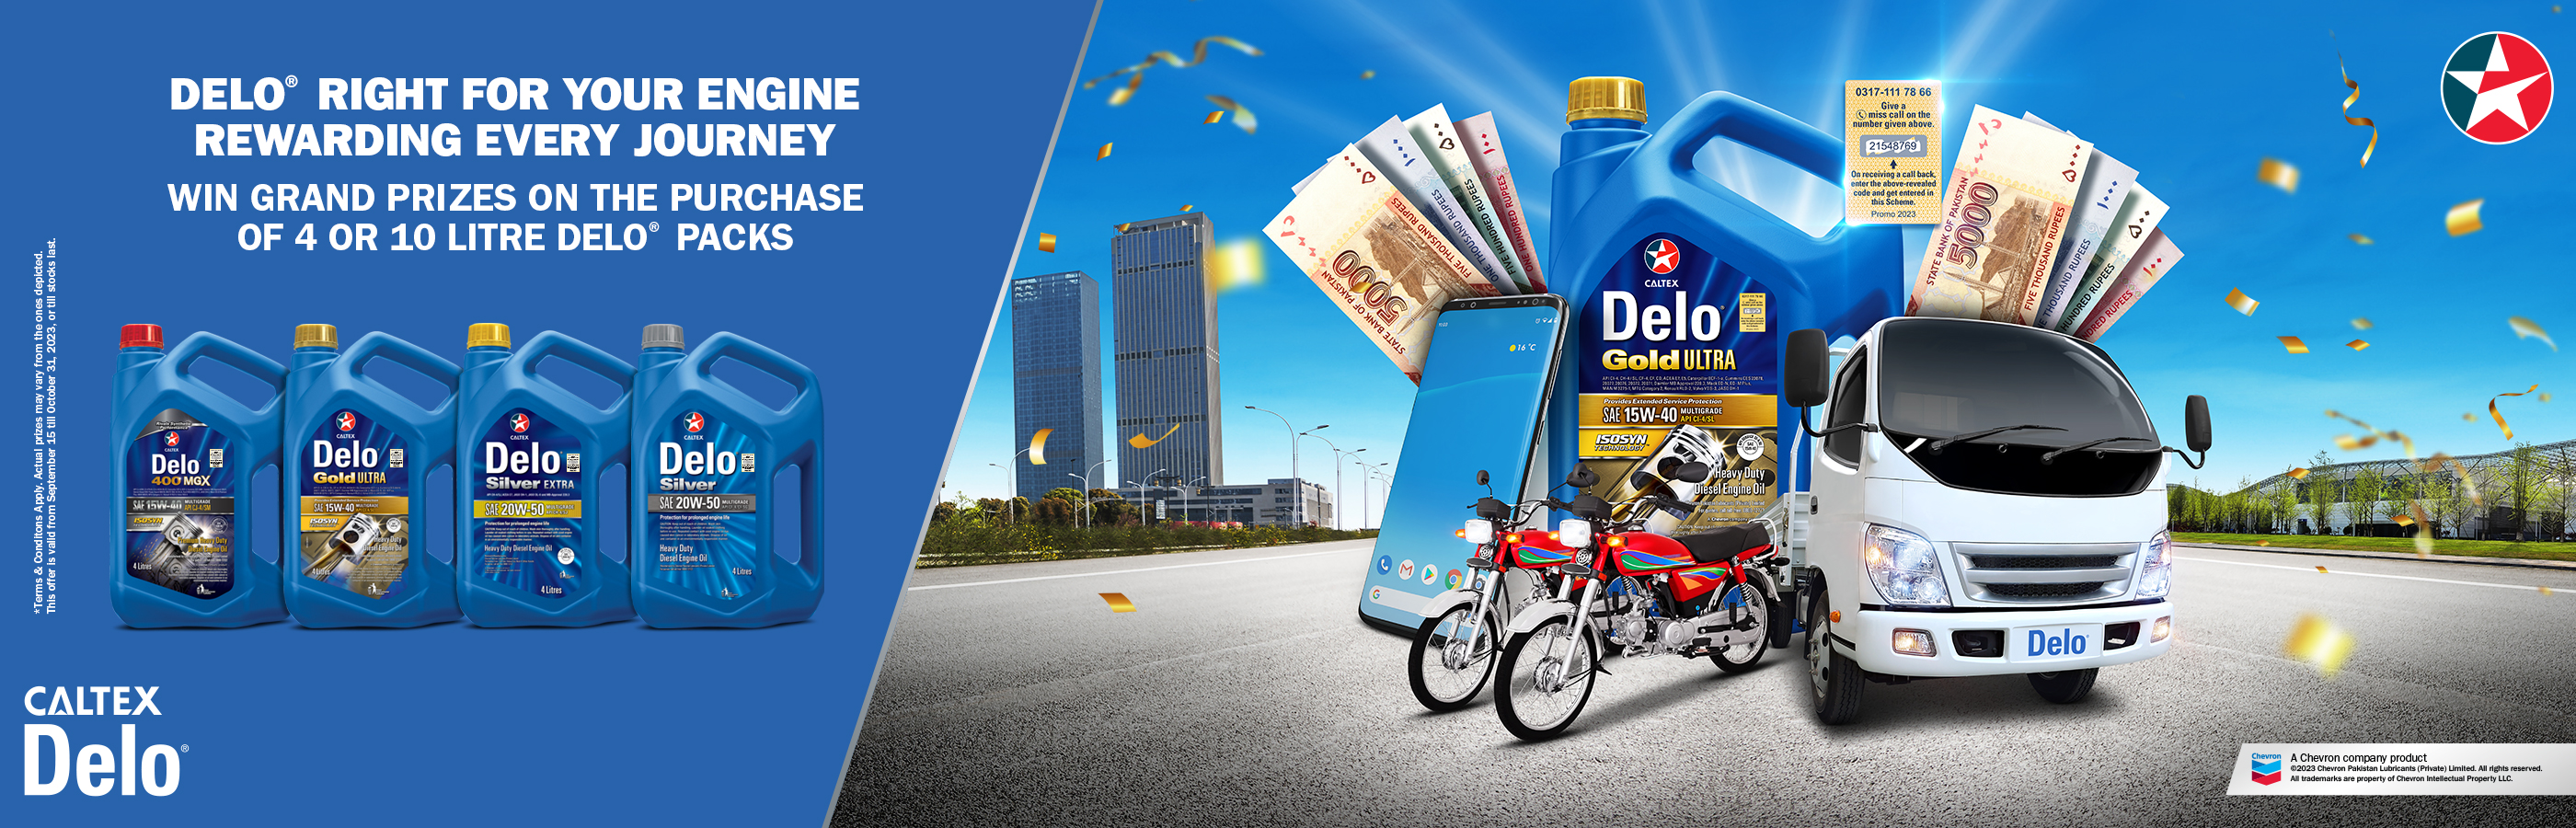 Win Cash with every Delo purchase!